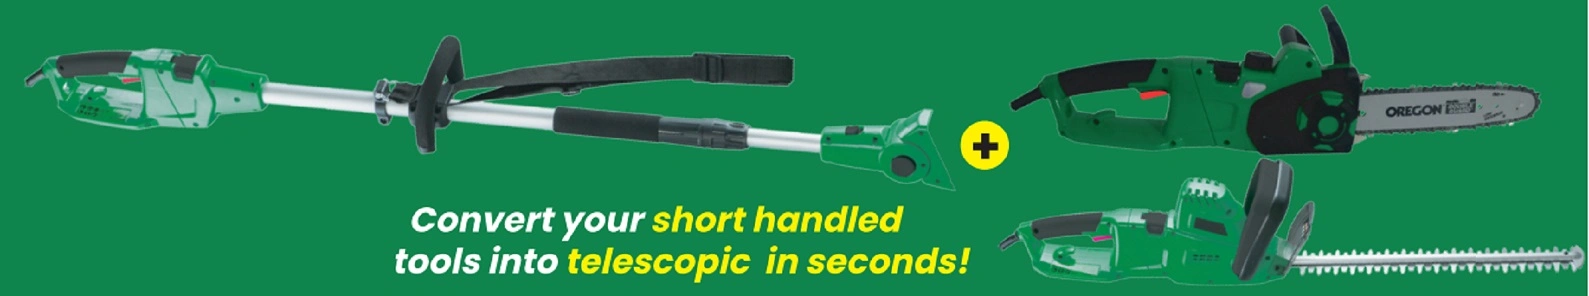 Electric 4in1 Tool Set-Short&Telescopic Chainsaw/Hedge Trimmer Garden Power Tool